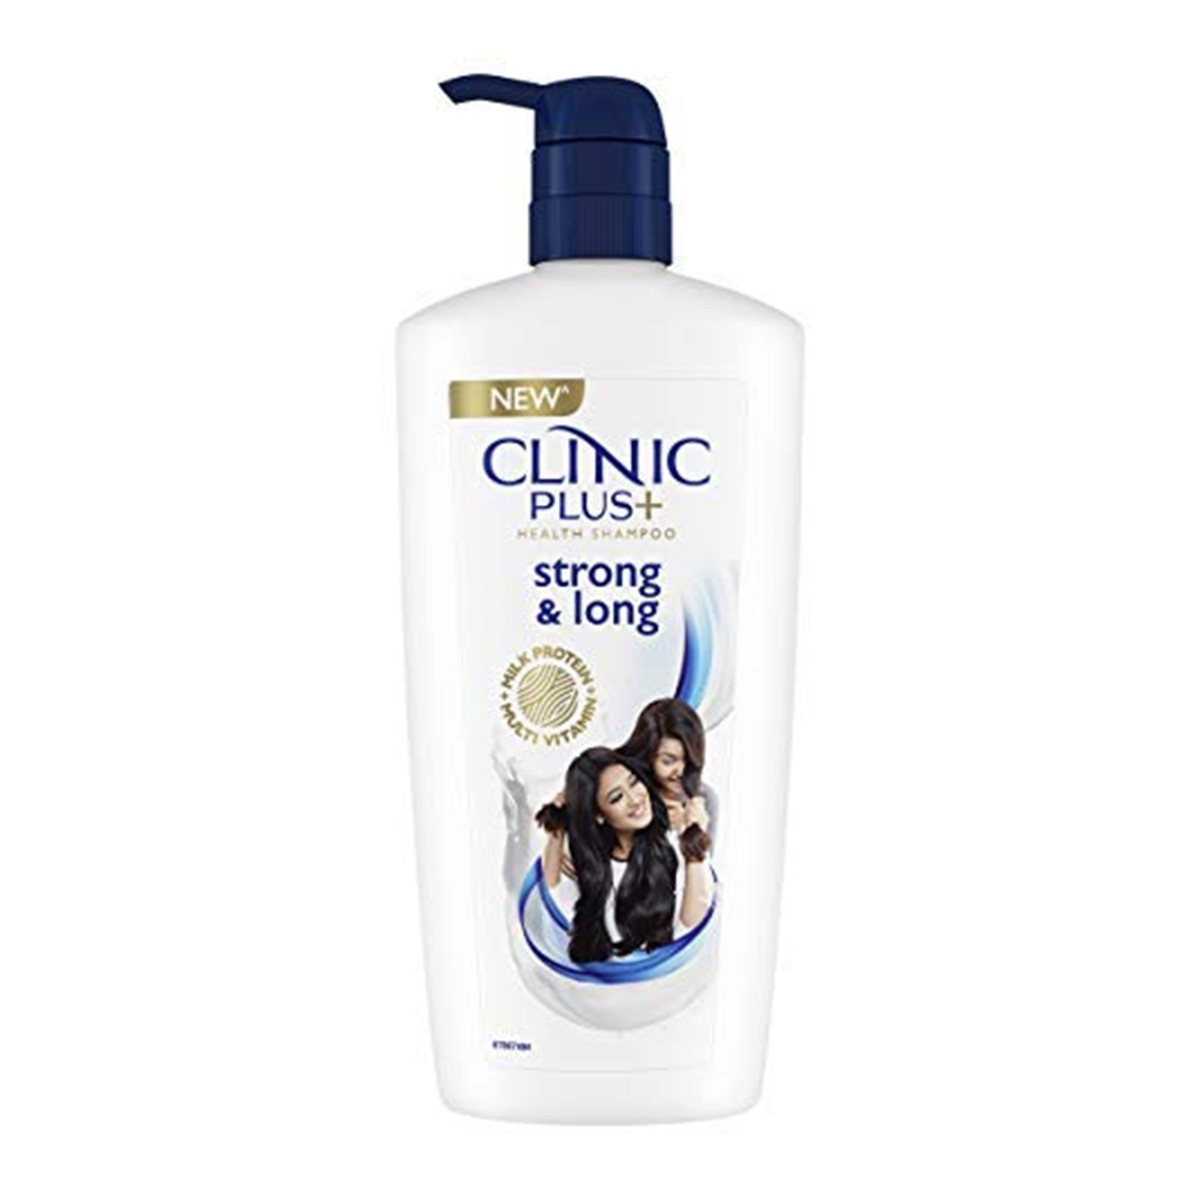 Clinic Plus Strong & Long Shampoo with Milk Proteins & Multivitamins, 650ml